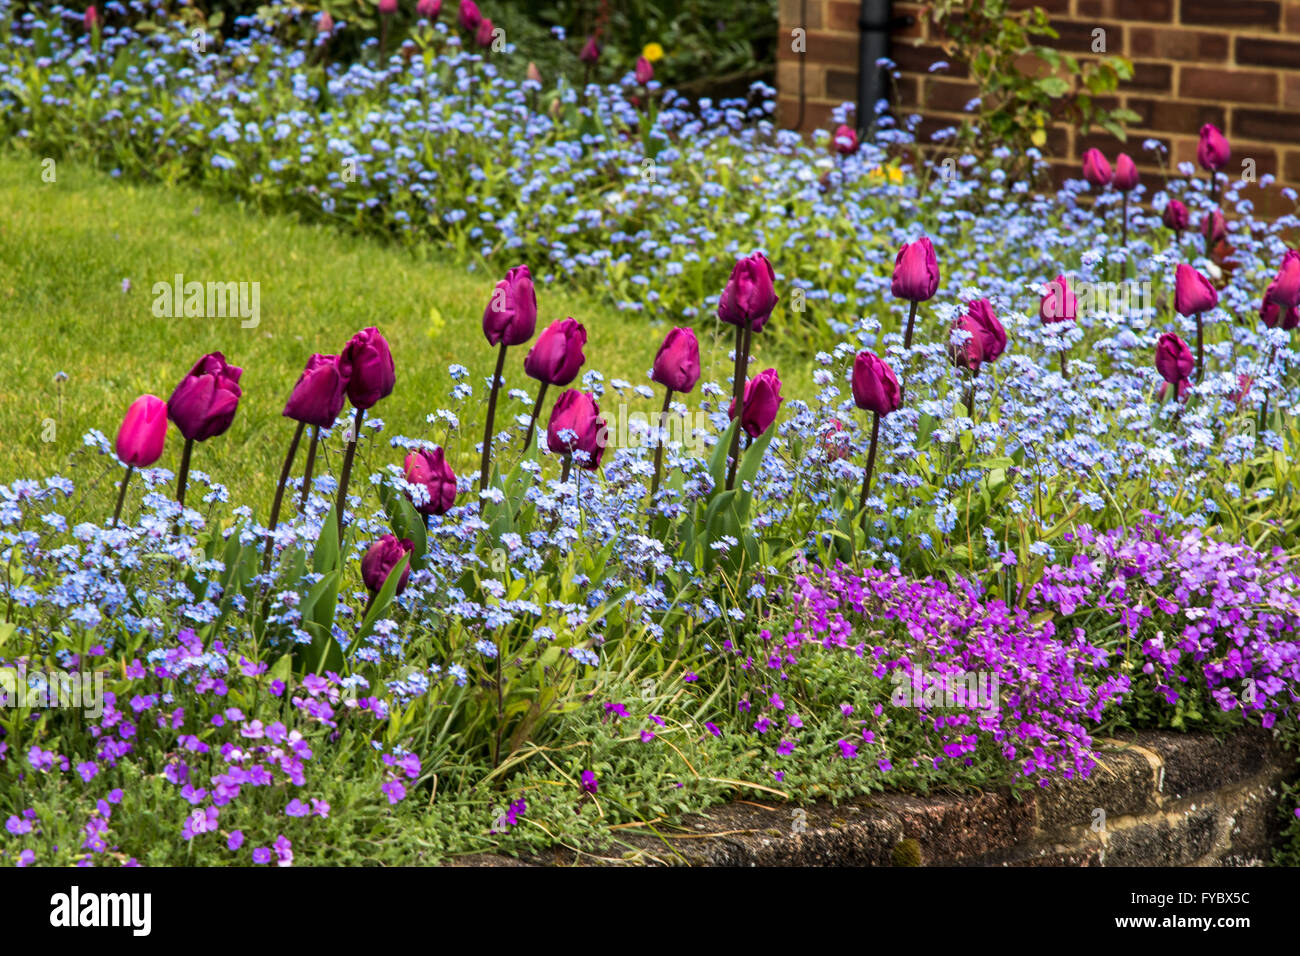 Spring flower beds in a front garden Stock Photo